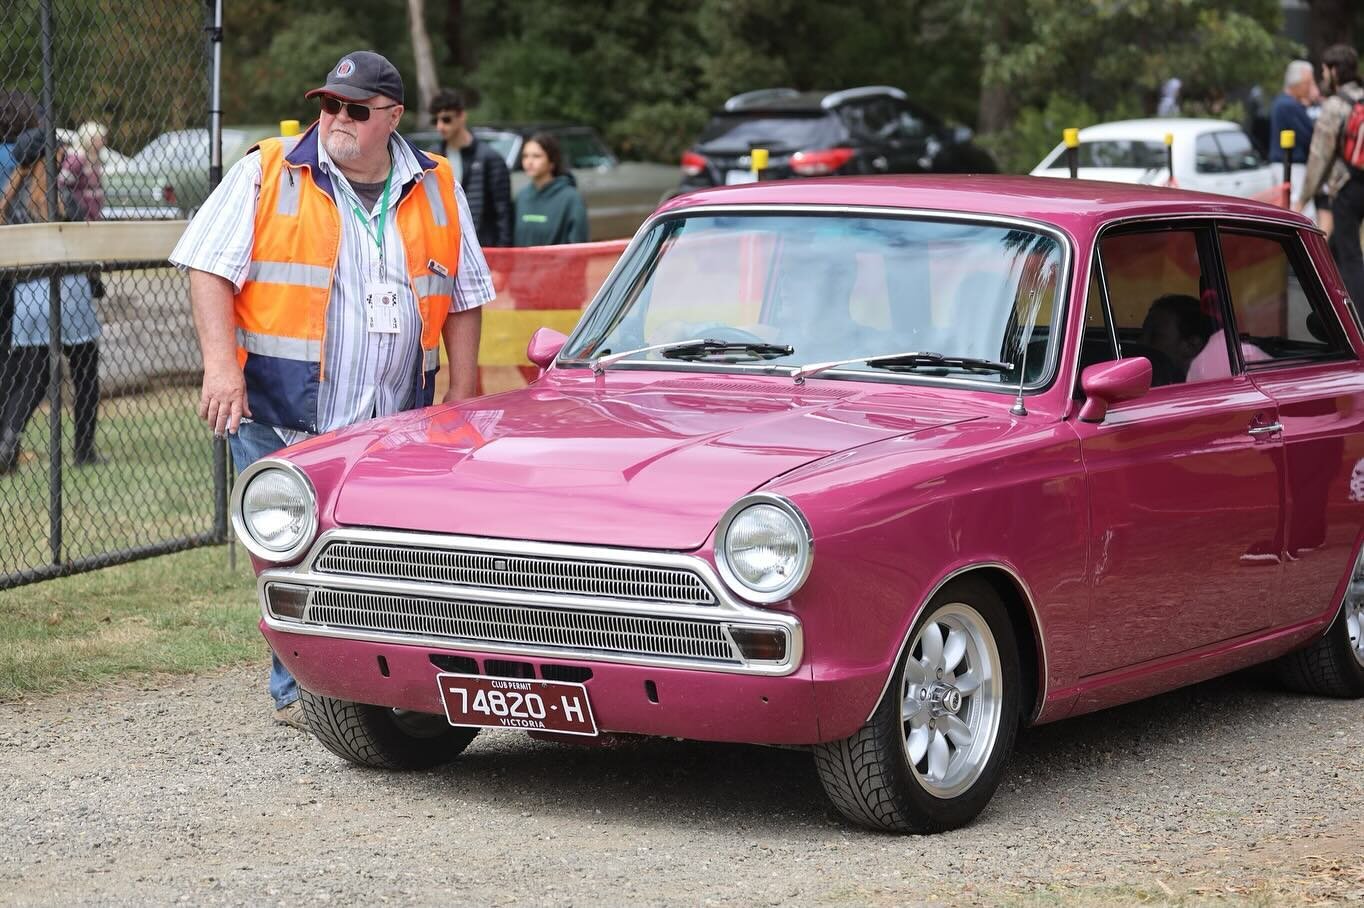 We had a ball at the 2023 Picnic at Hanging Rock Car Show and we couldn&rsquo;t wait to be a part of the event again this year! The Marque Collective has the privilege of securing access to all years of cars within our community to attend, so whether